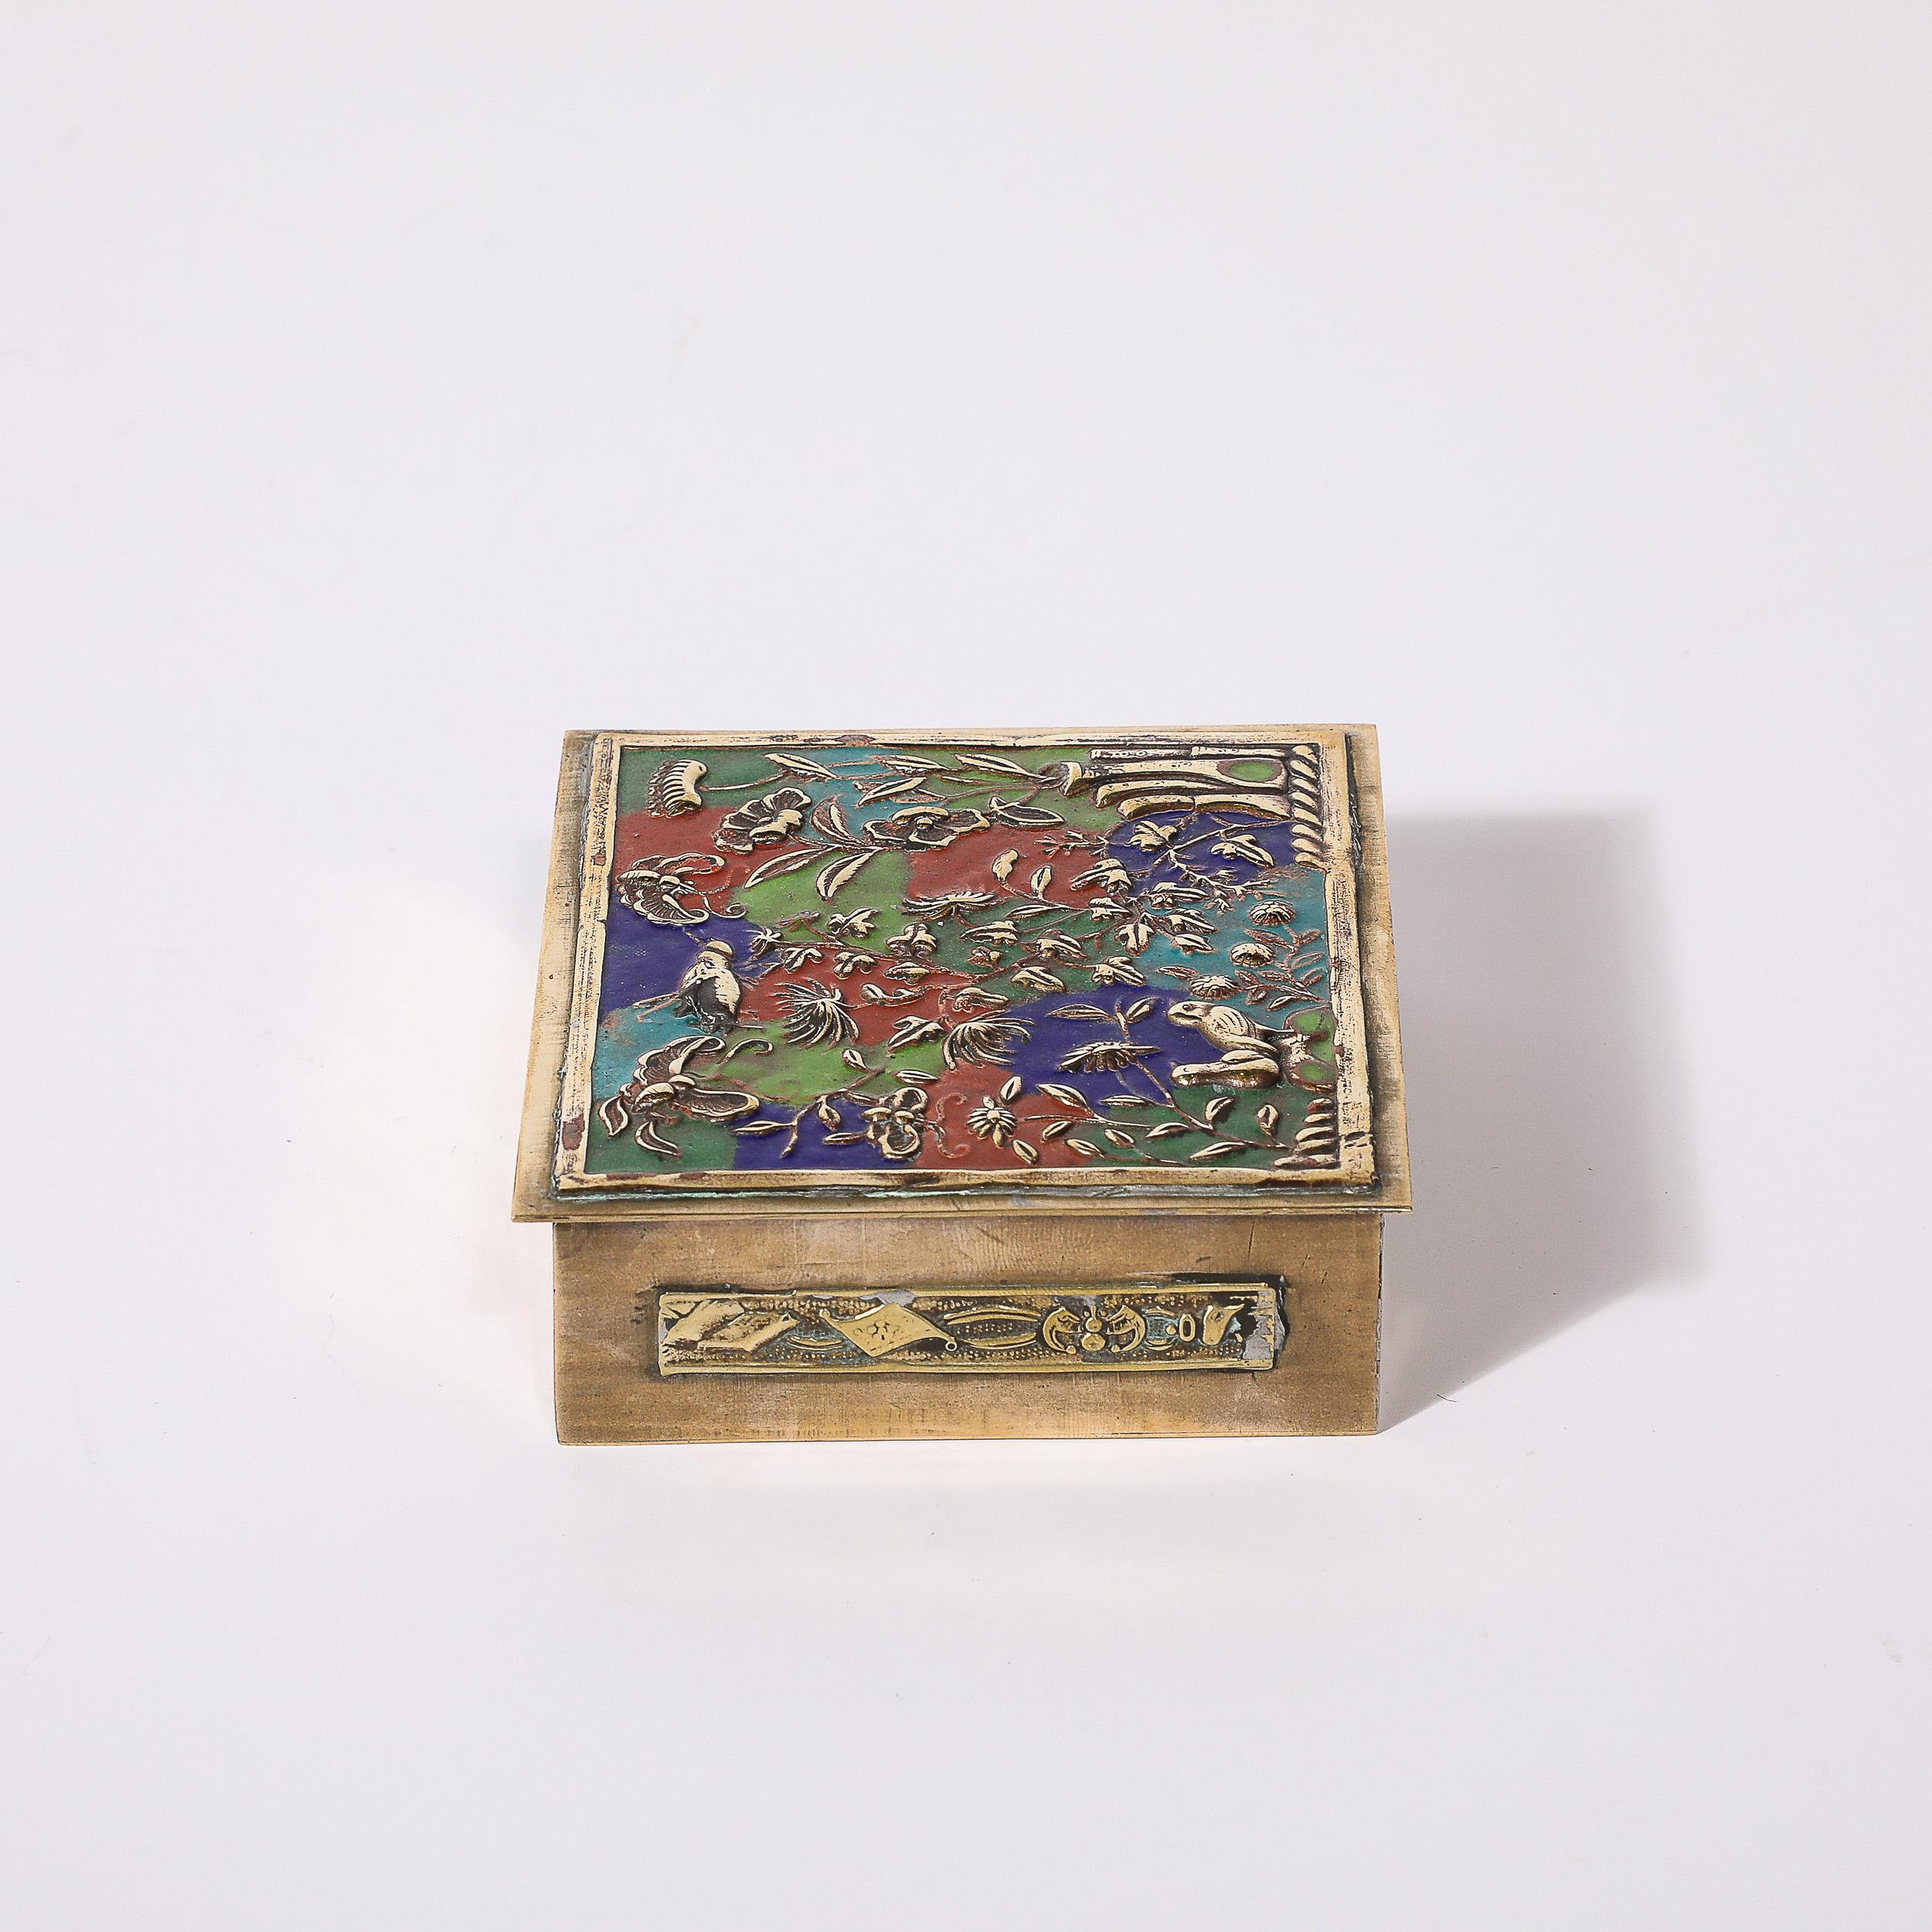 Art Deco Brass and Enamel Box W/ Naturalist Imagery in Relief Cloisonne For Sale 1